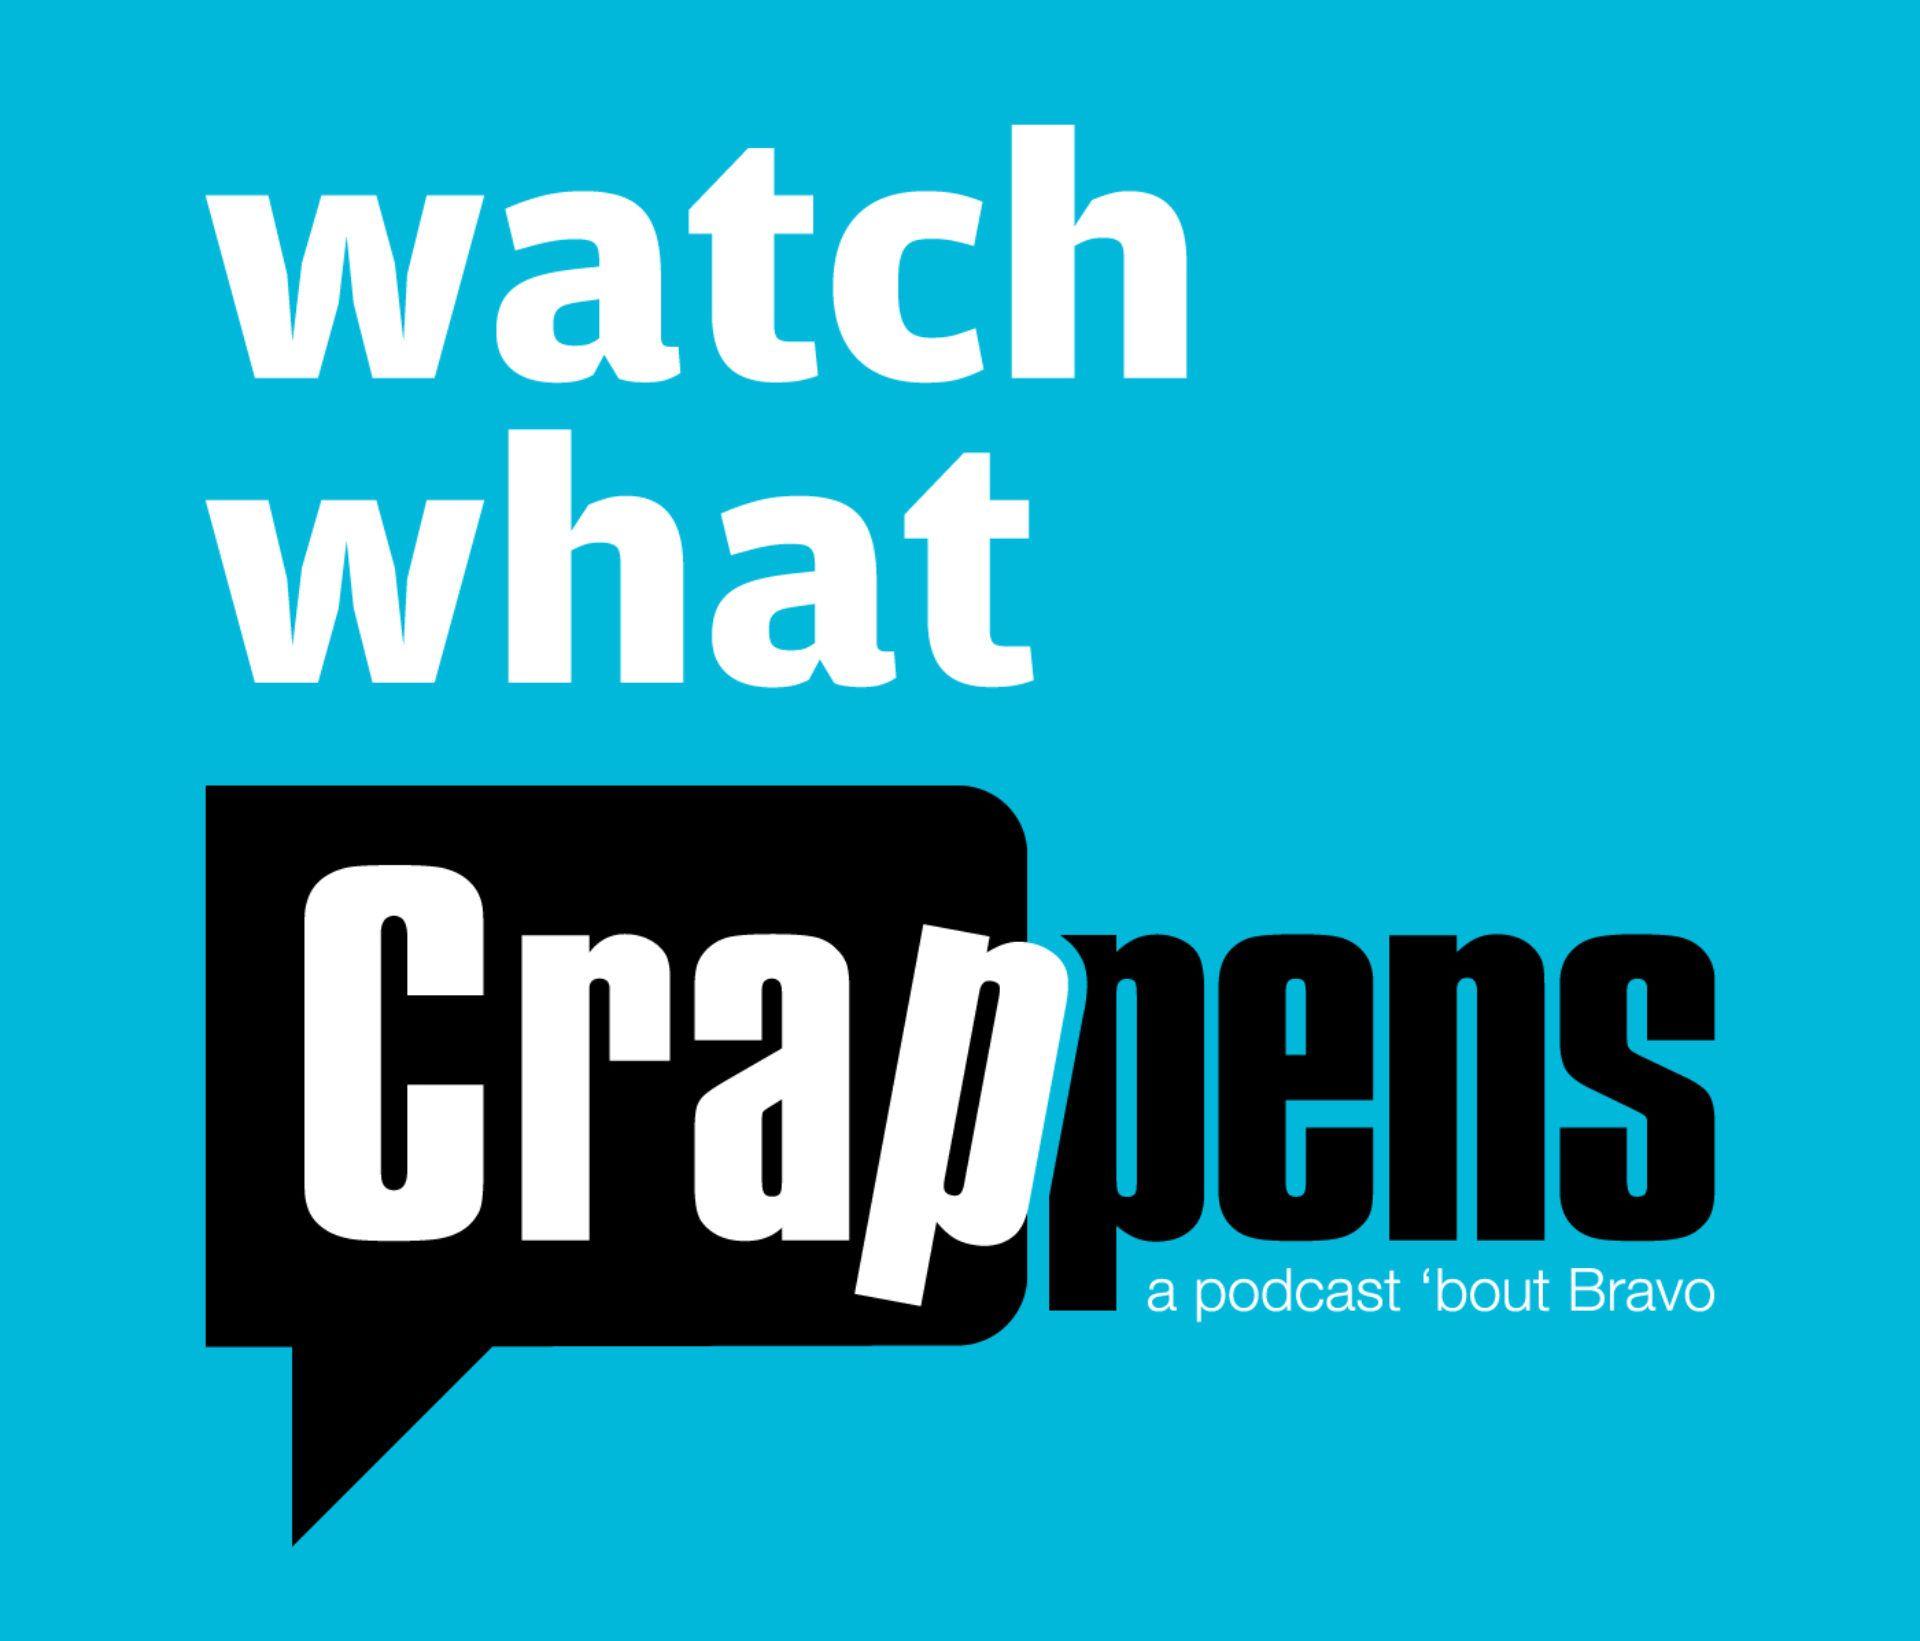 Bravotv.com Logo - Watch What Crappens Podcast – A Podcast About All Things Bravo TV